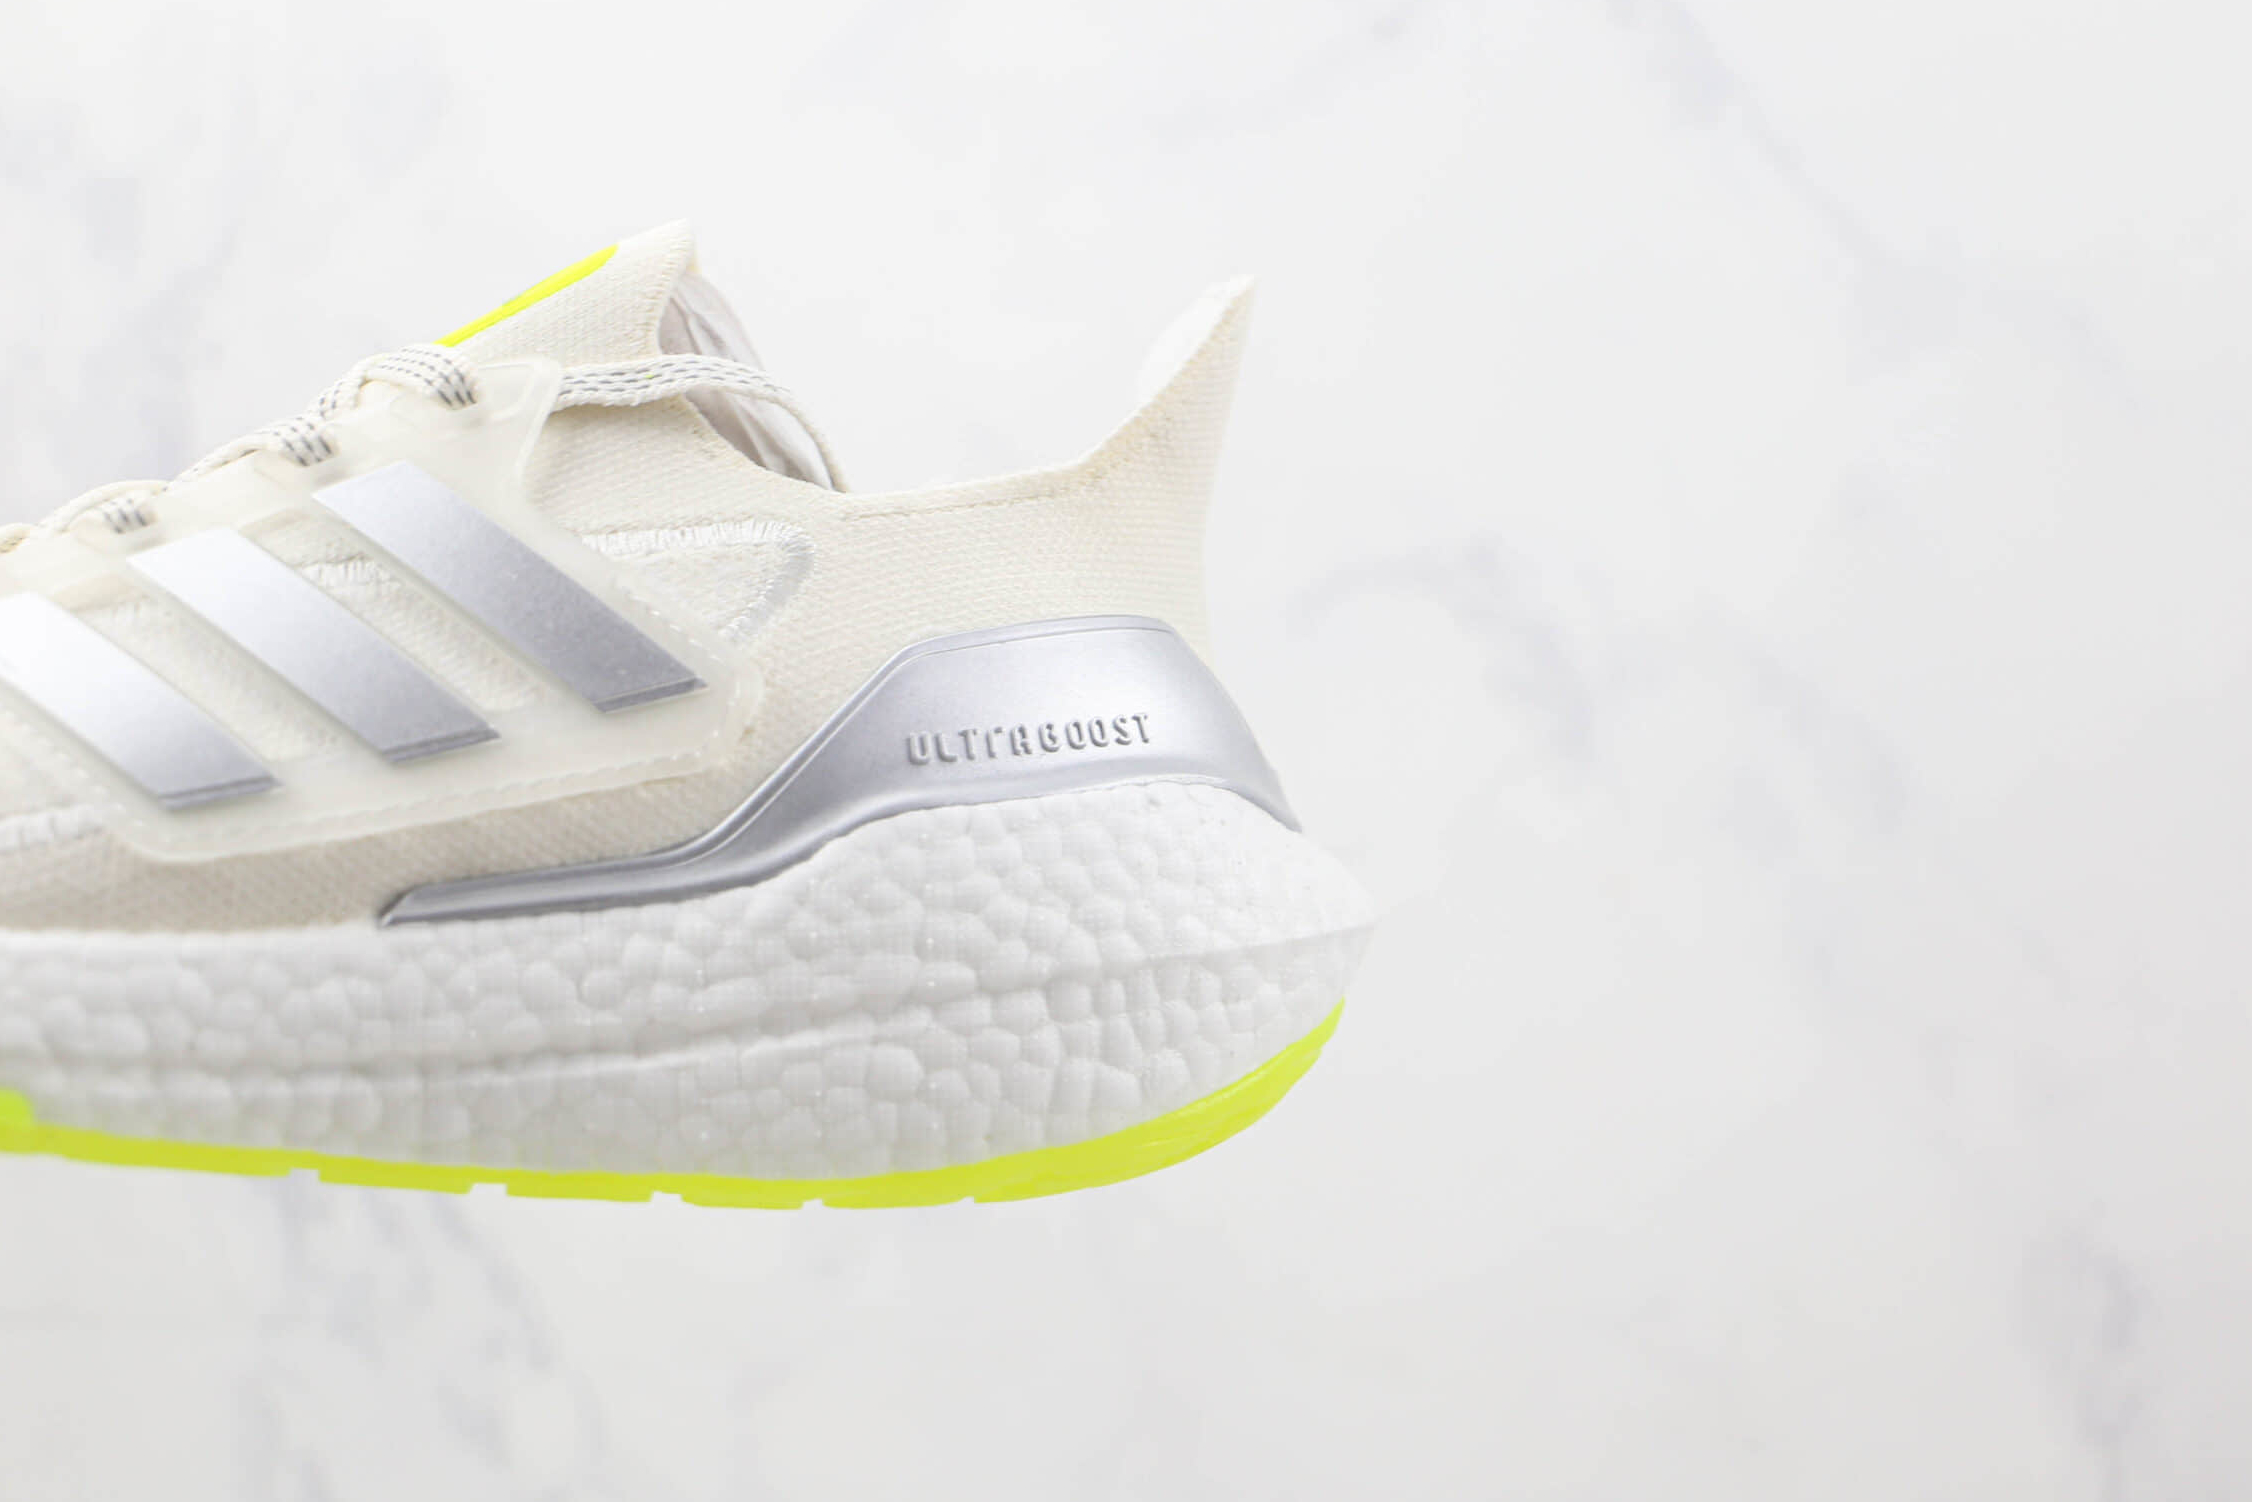 Adidas Ivy Park x UltraBoost 22 'IVYTOPIA' HR0181: Stylish and Performance-Driven Sneakers